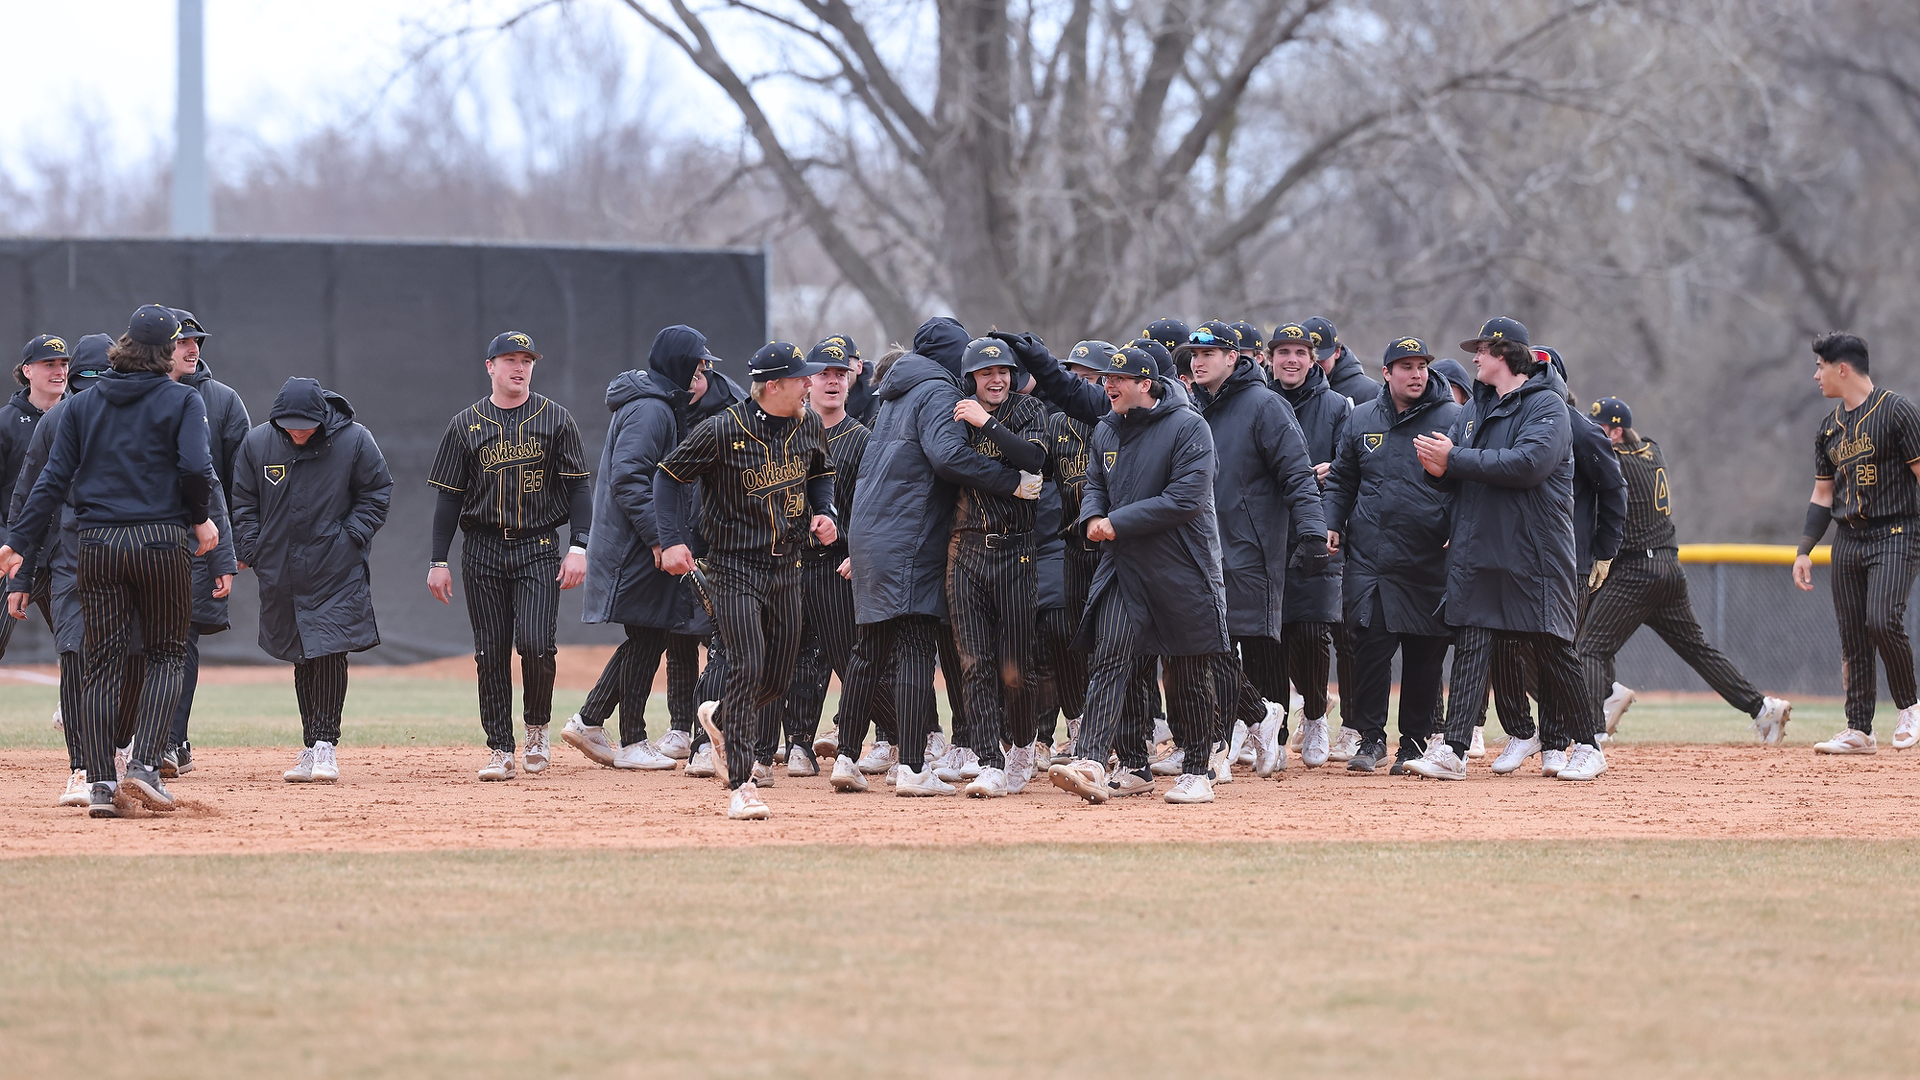 Titans celebrate after completing series sweep of Eau Claire. Photo Credit: Steve Frommell, UW-Oshkosh Sports Information